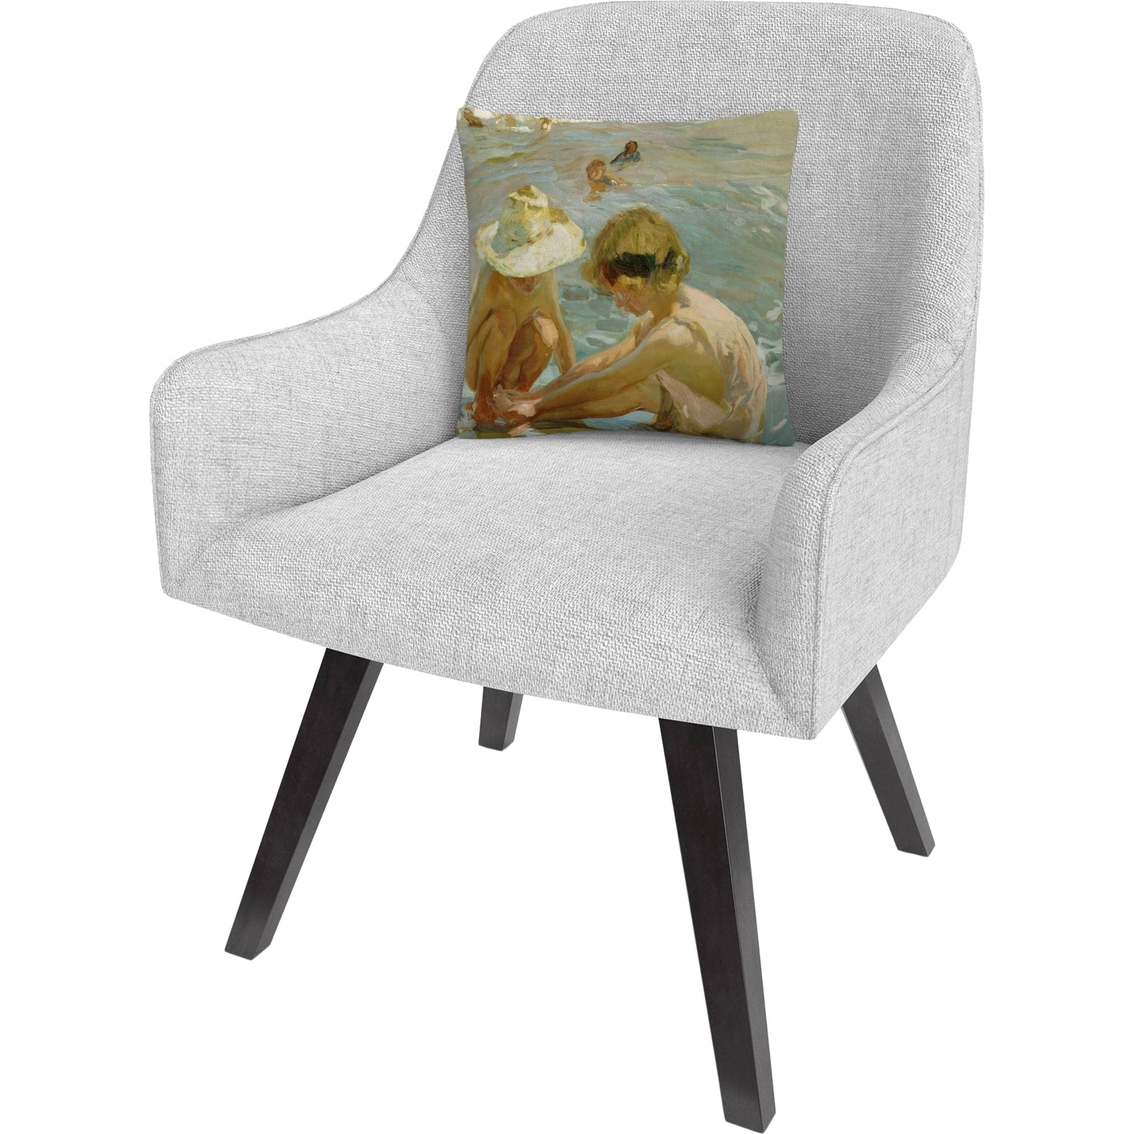 Trademark Fine Art Joaquin Sorolla The Wounded Foot Decorative Throw Pillow - Image 2 of 3